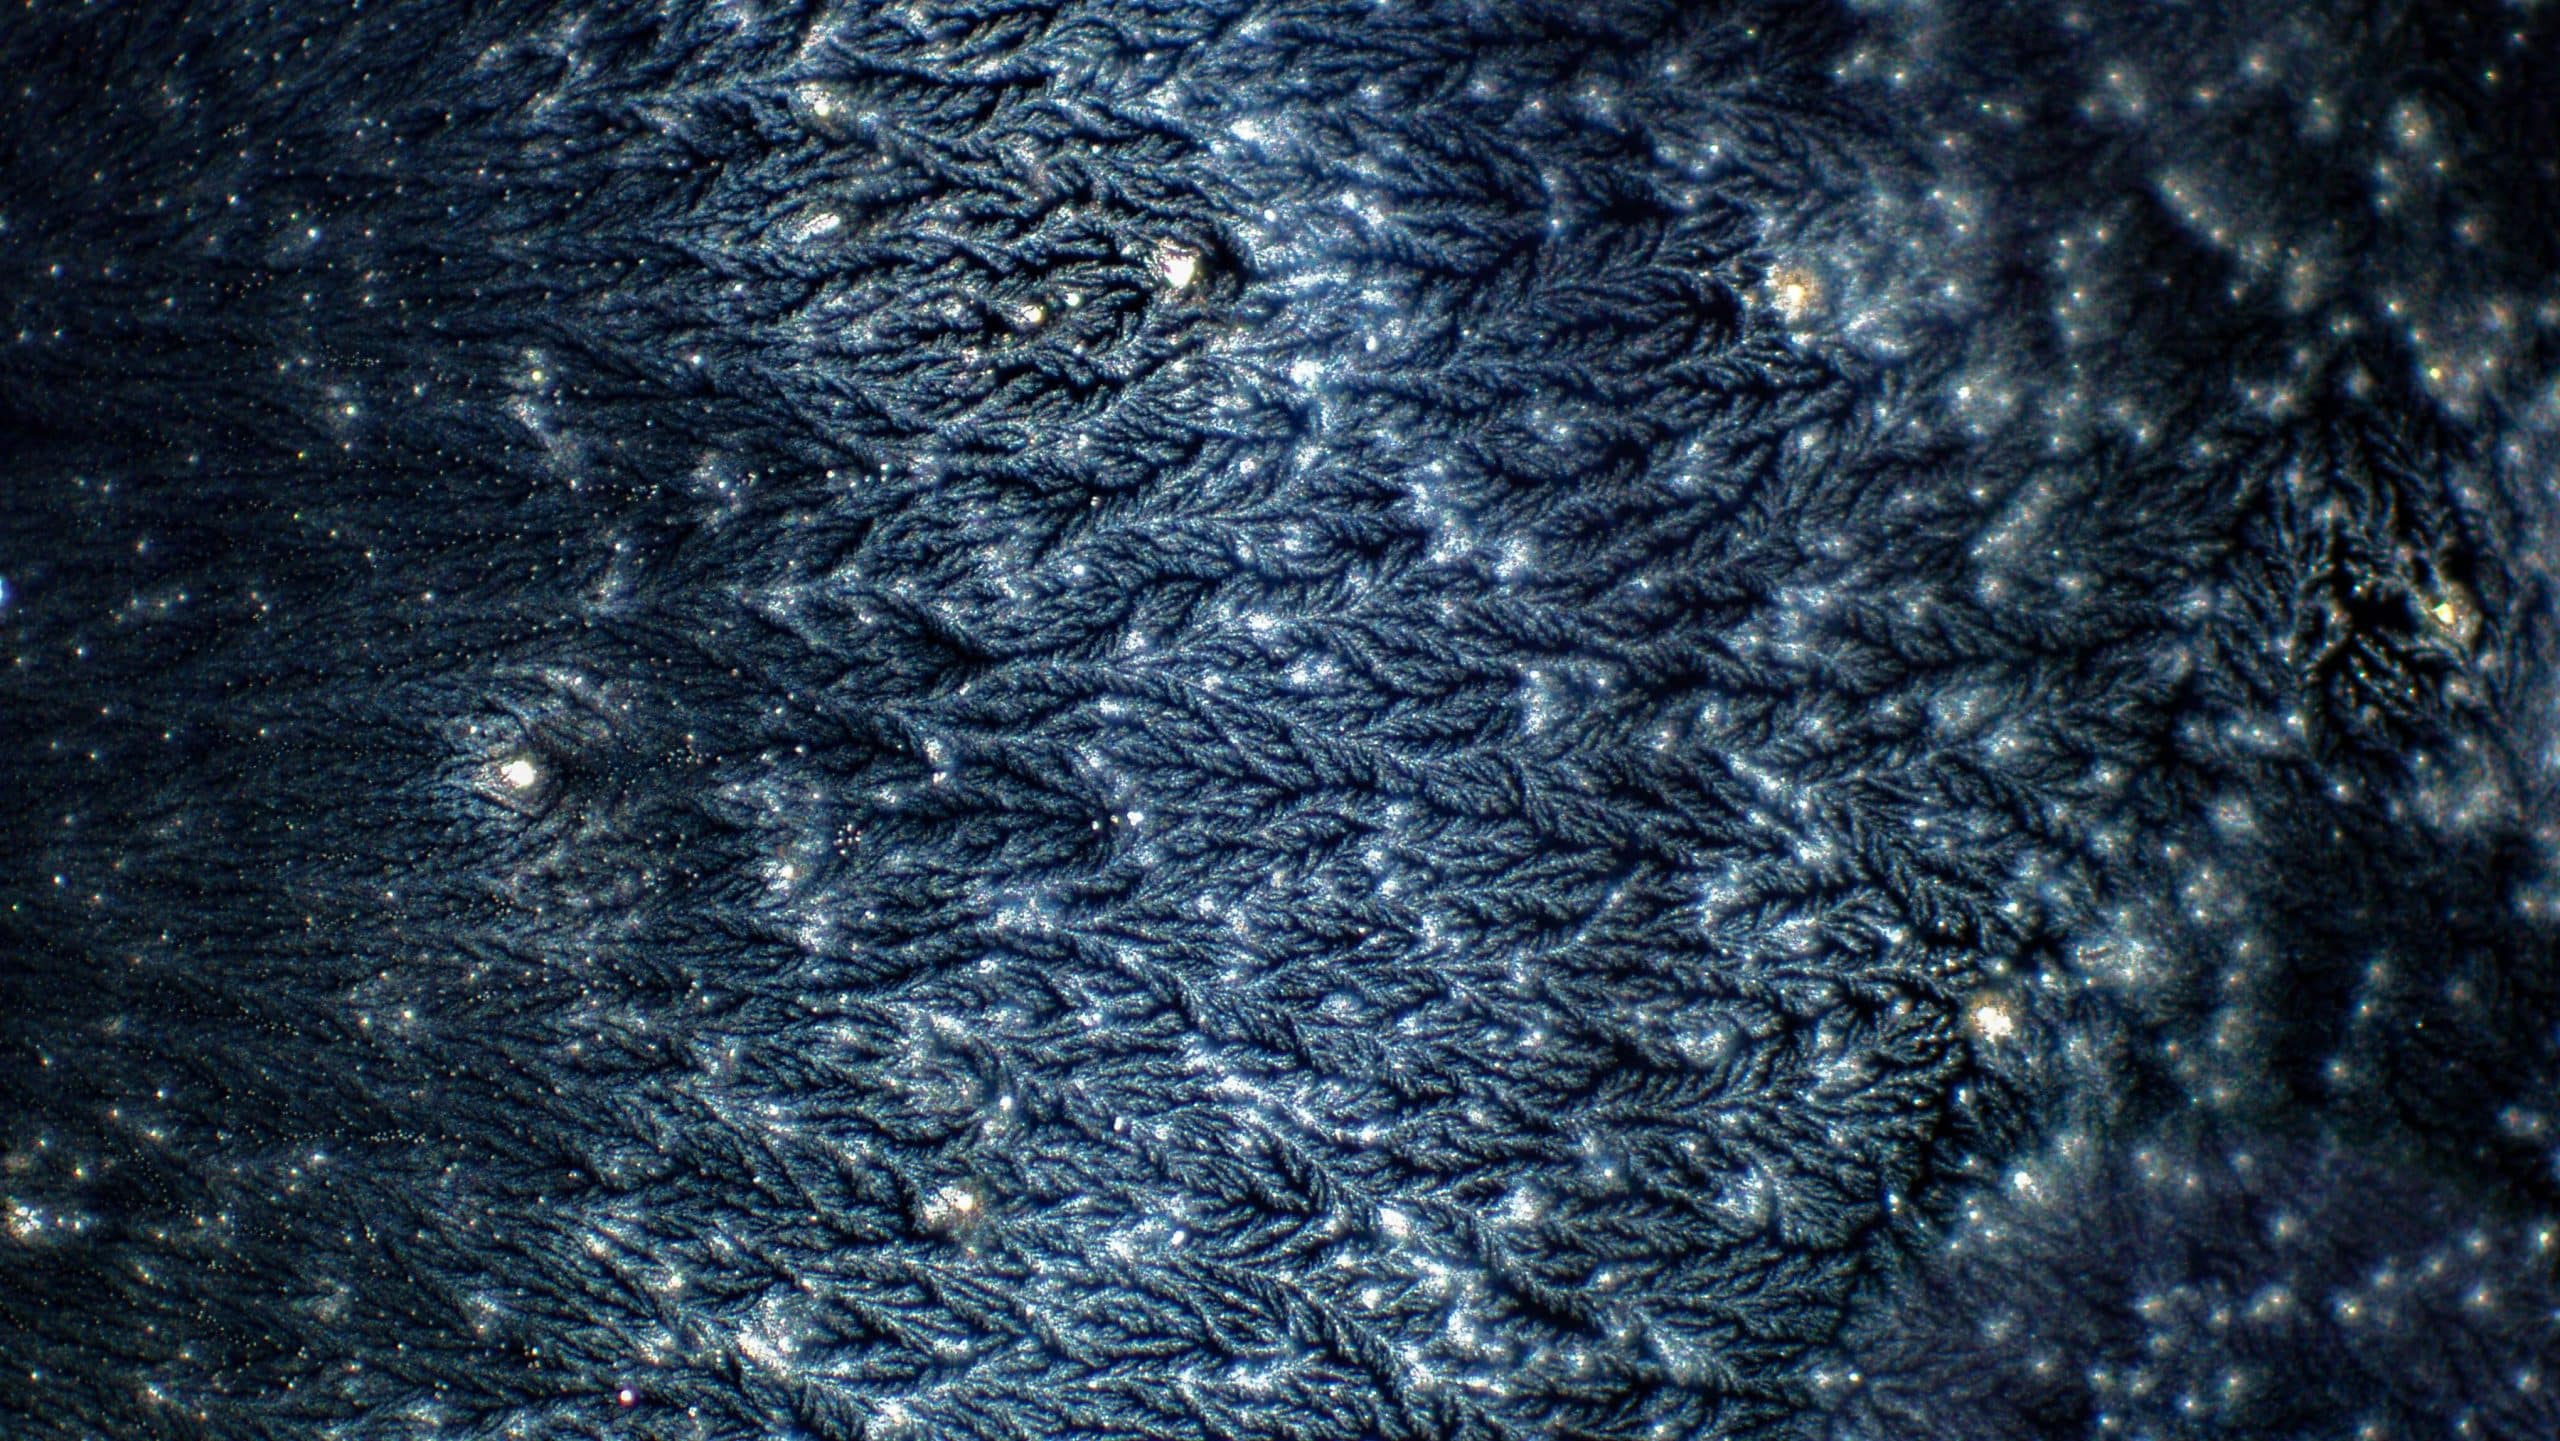 A microscopic view of salt crystals in soft dark blue light.